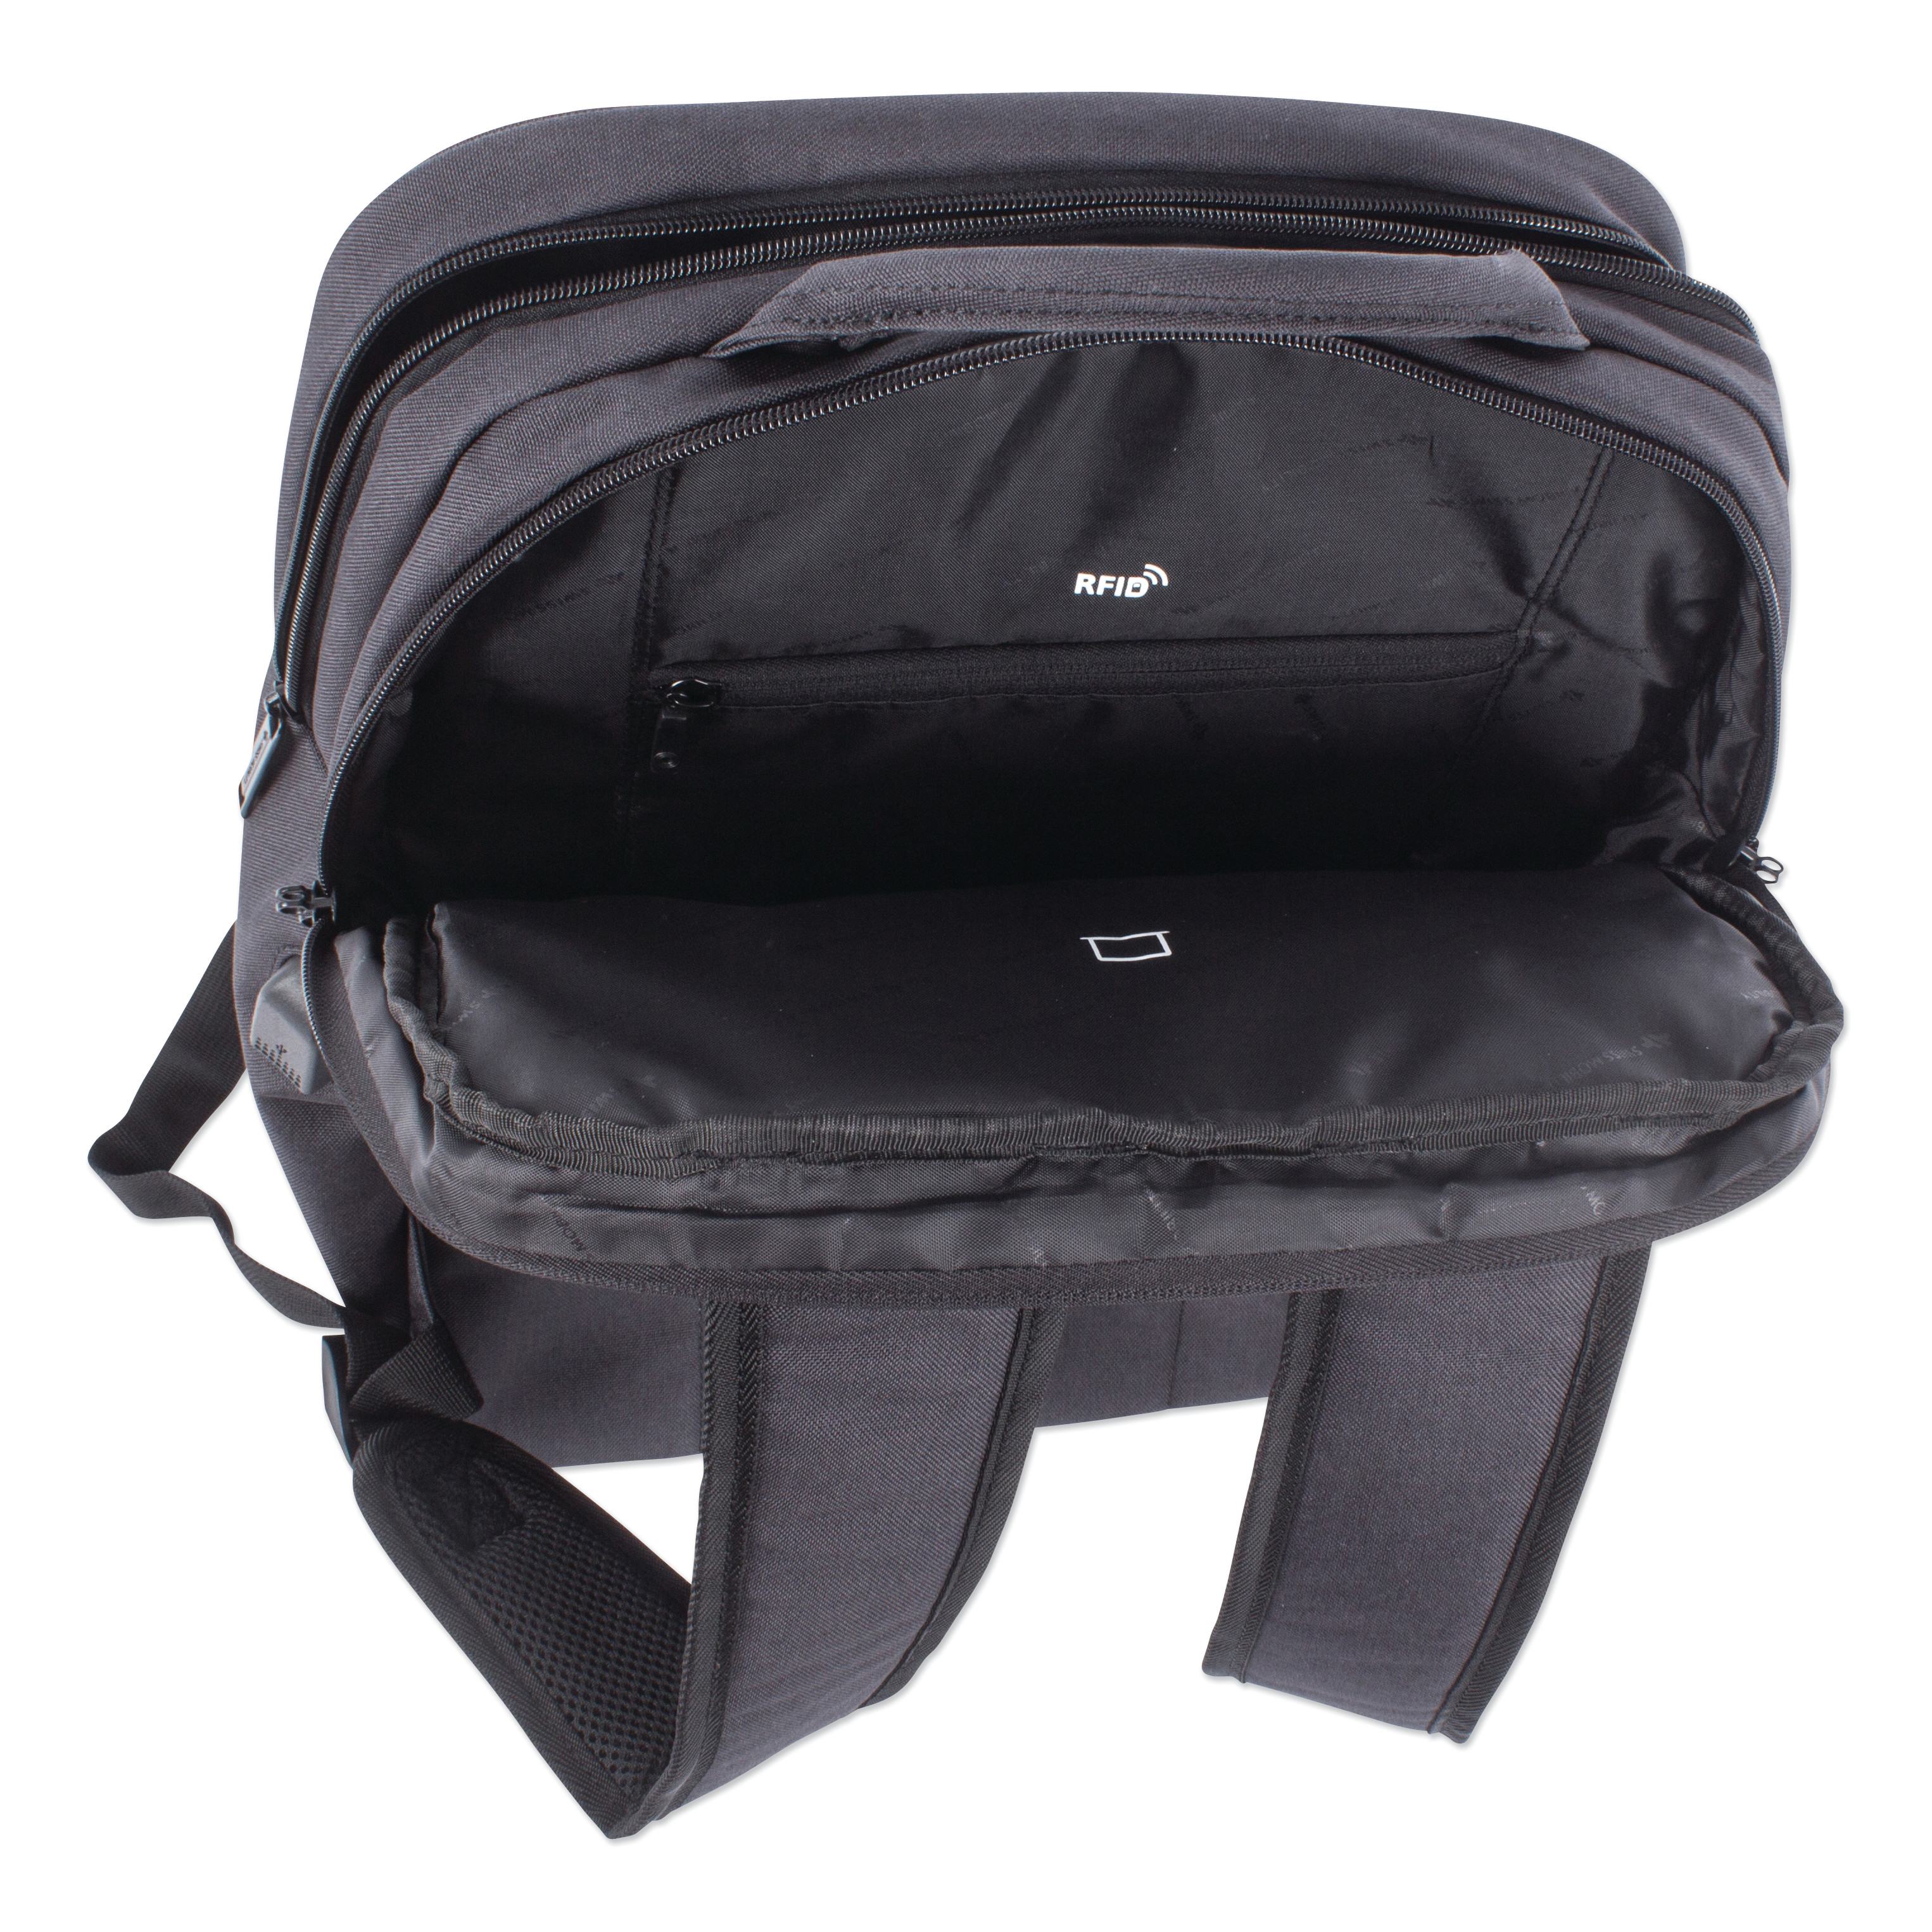 Swiss Mobility Cadence 2 Section Business Backpack, For Laptops 15.6", 6" x 6" x 17", Charcoal -SWZBKP1012SMCH - image 3 of 5